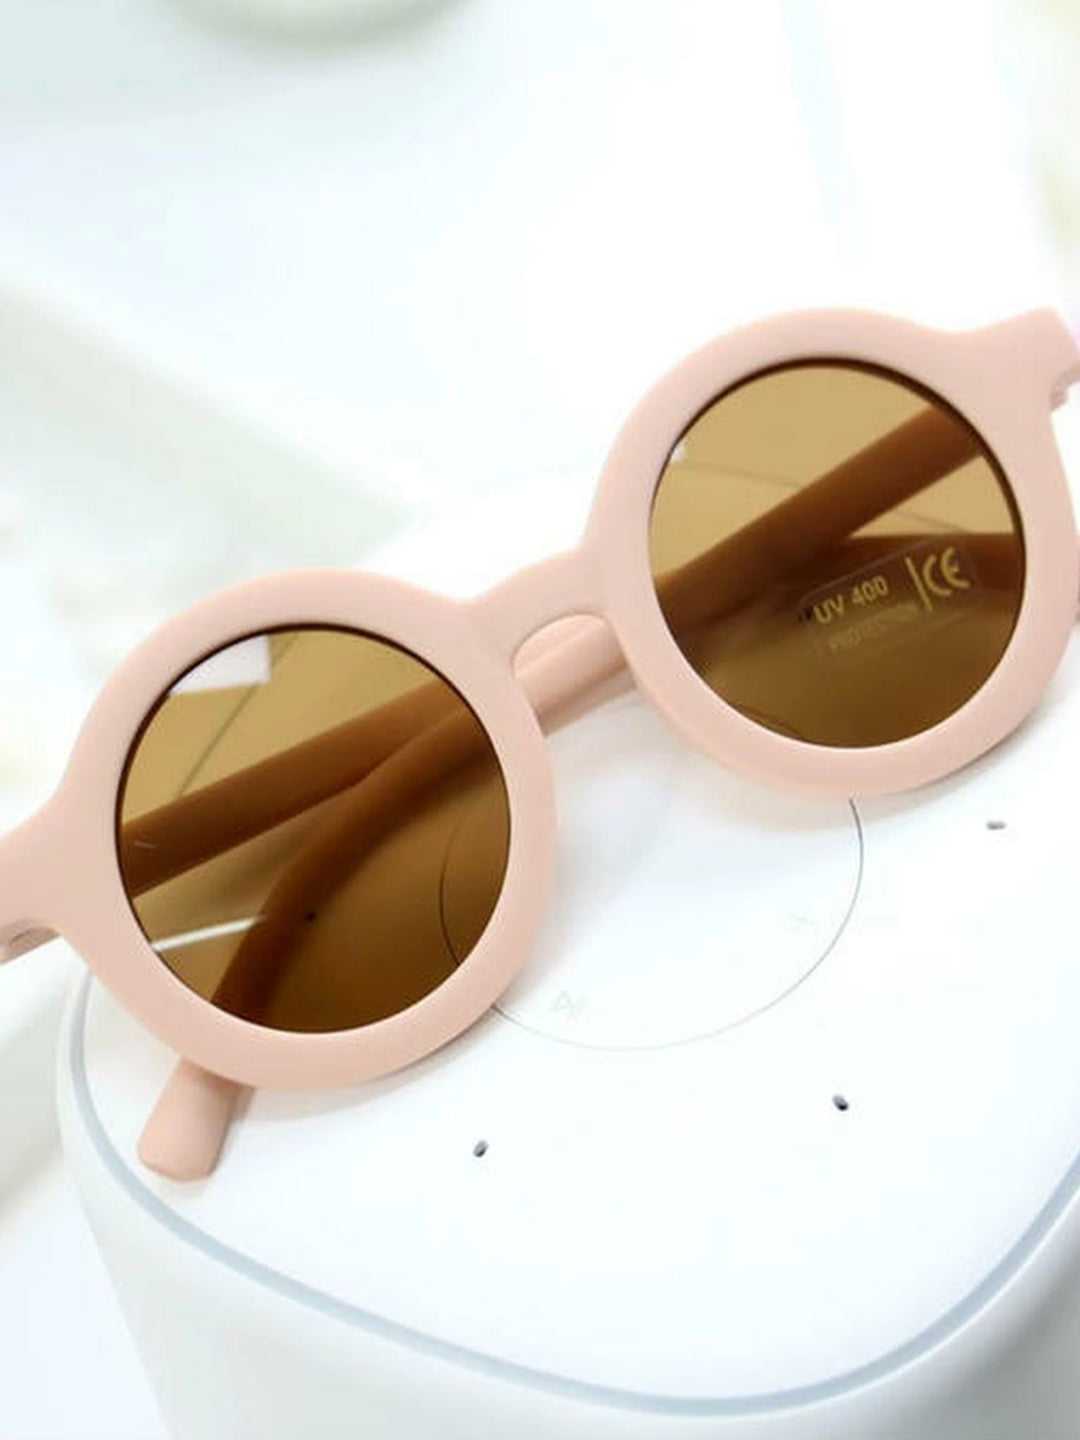 Baby/Toddler Sunglasses Pink Green Beige